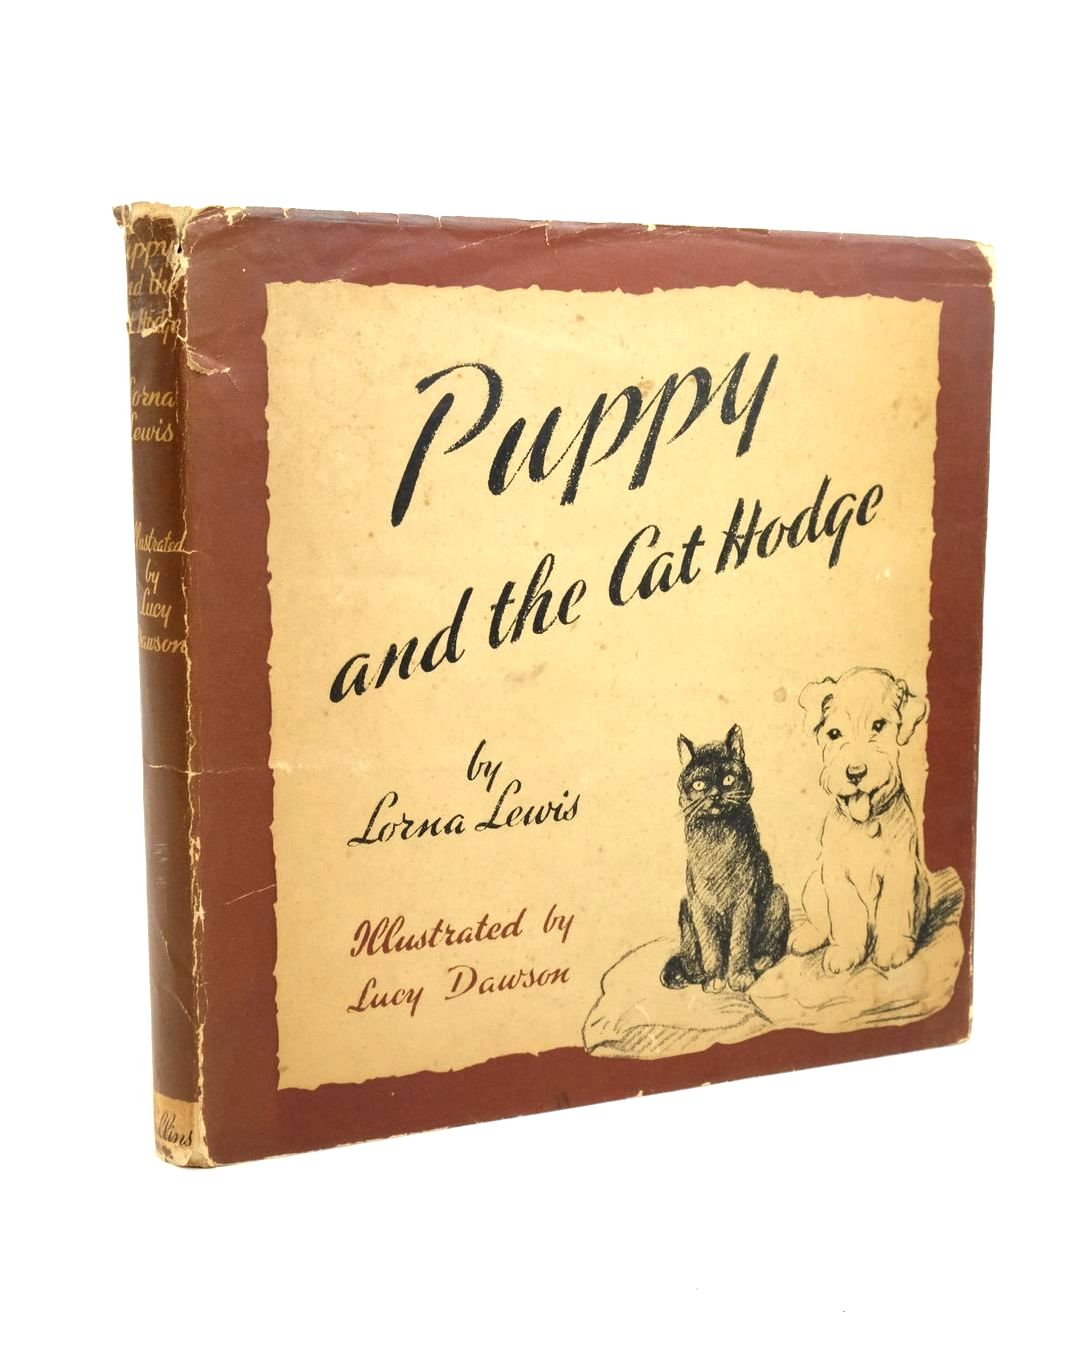 Photo of PUPPY AND THE CAT HODGE written by Lewis, Lorna illustrated by Dawson, Lucy published by Collins (STOCK CODE: 1322126)  for sale by Stella & Rose's Books